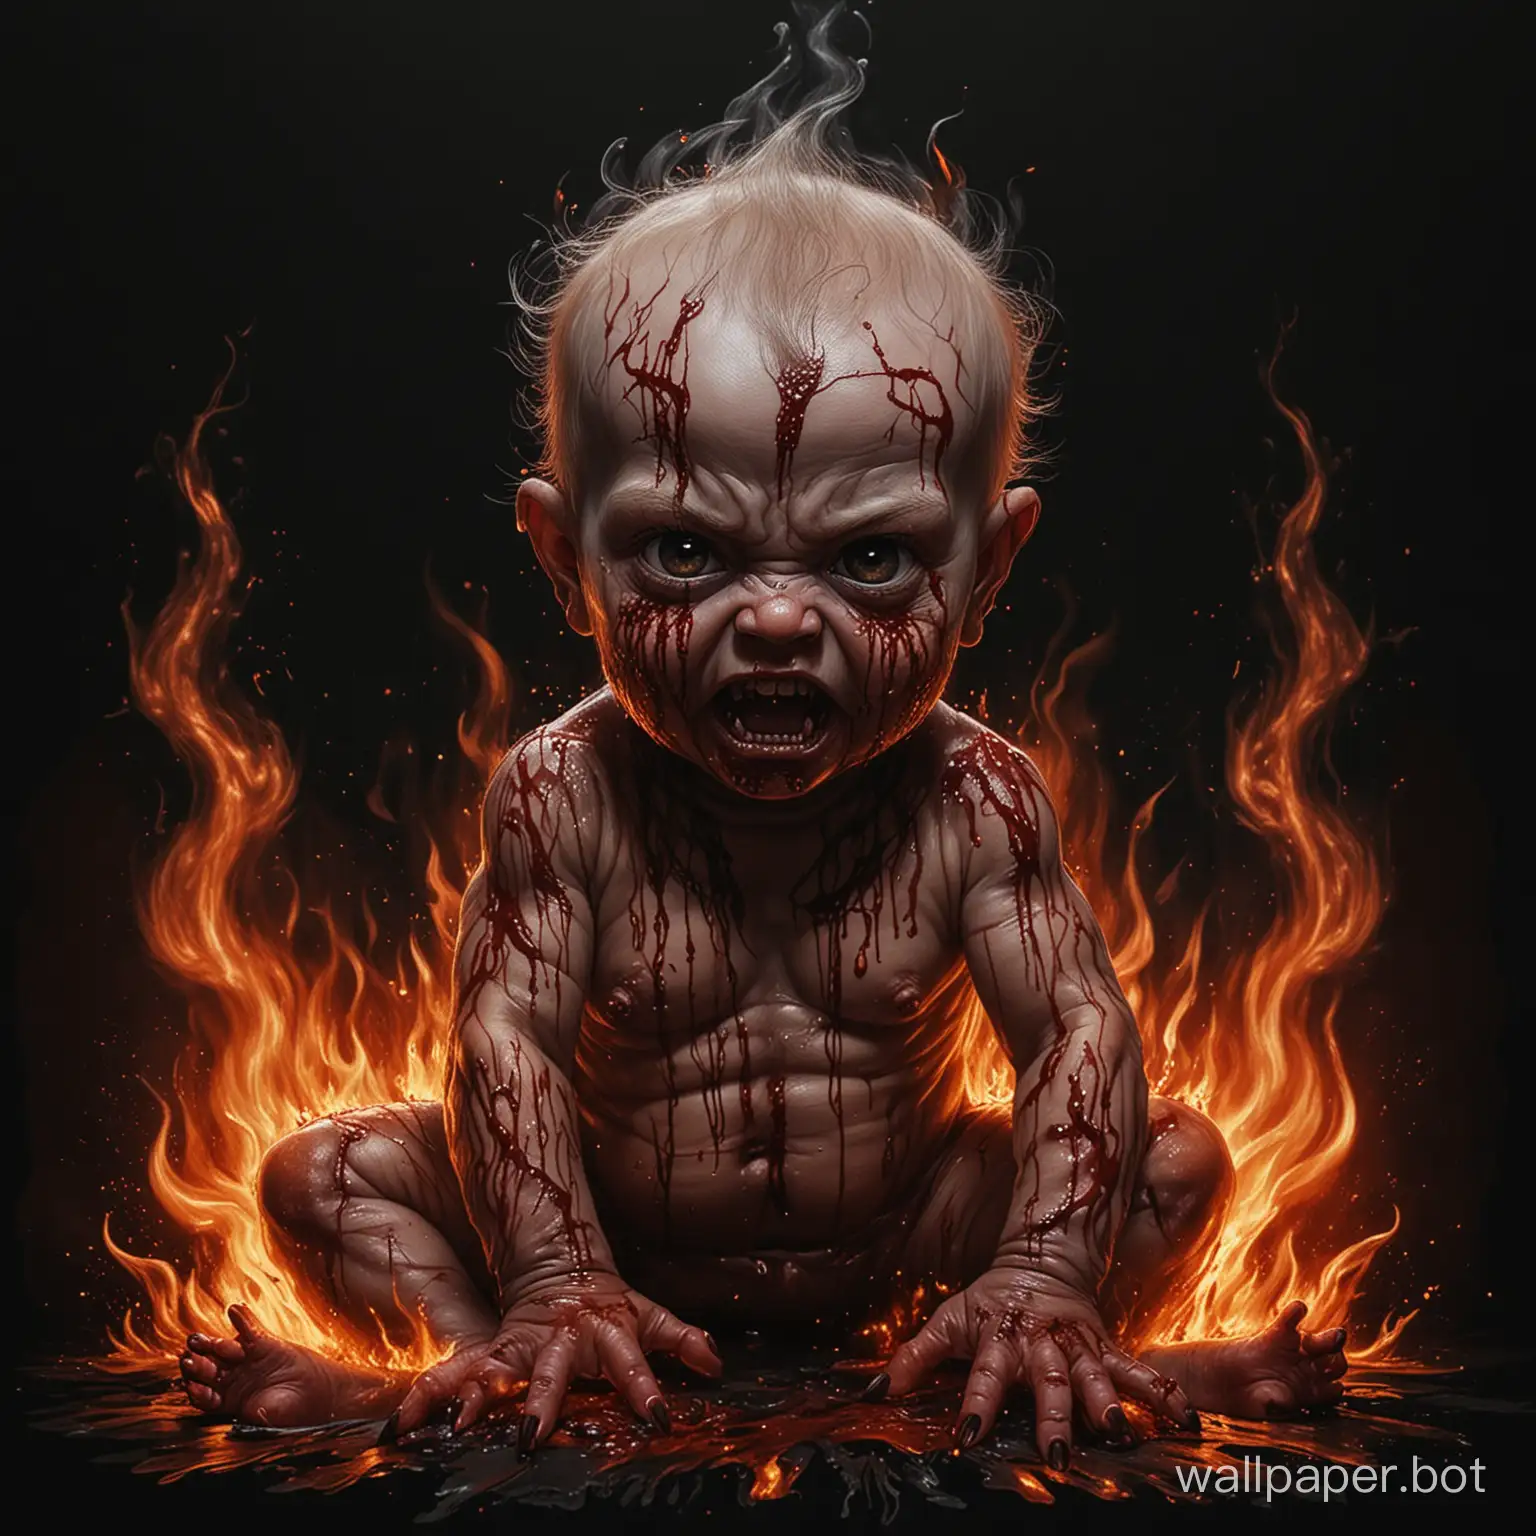 draw a scary, horrible, demonic baby on a black background, covered in blood and engulfed in flames